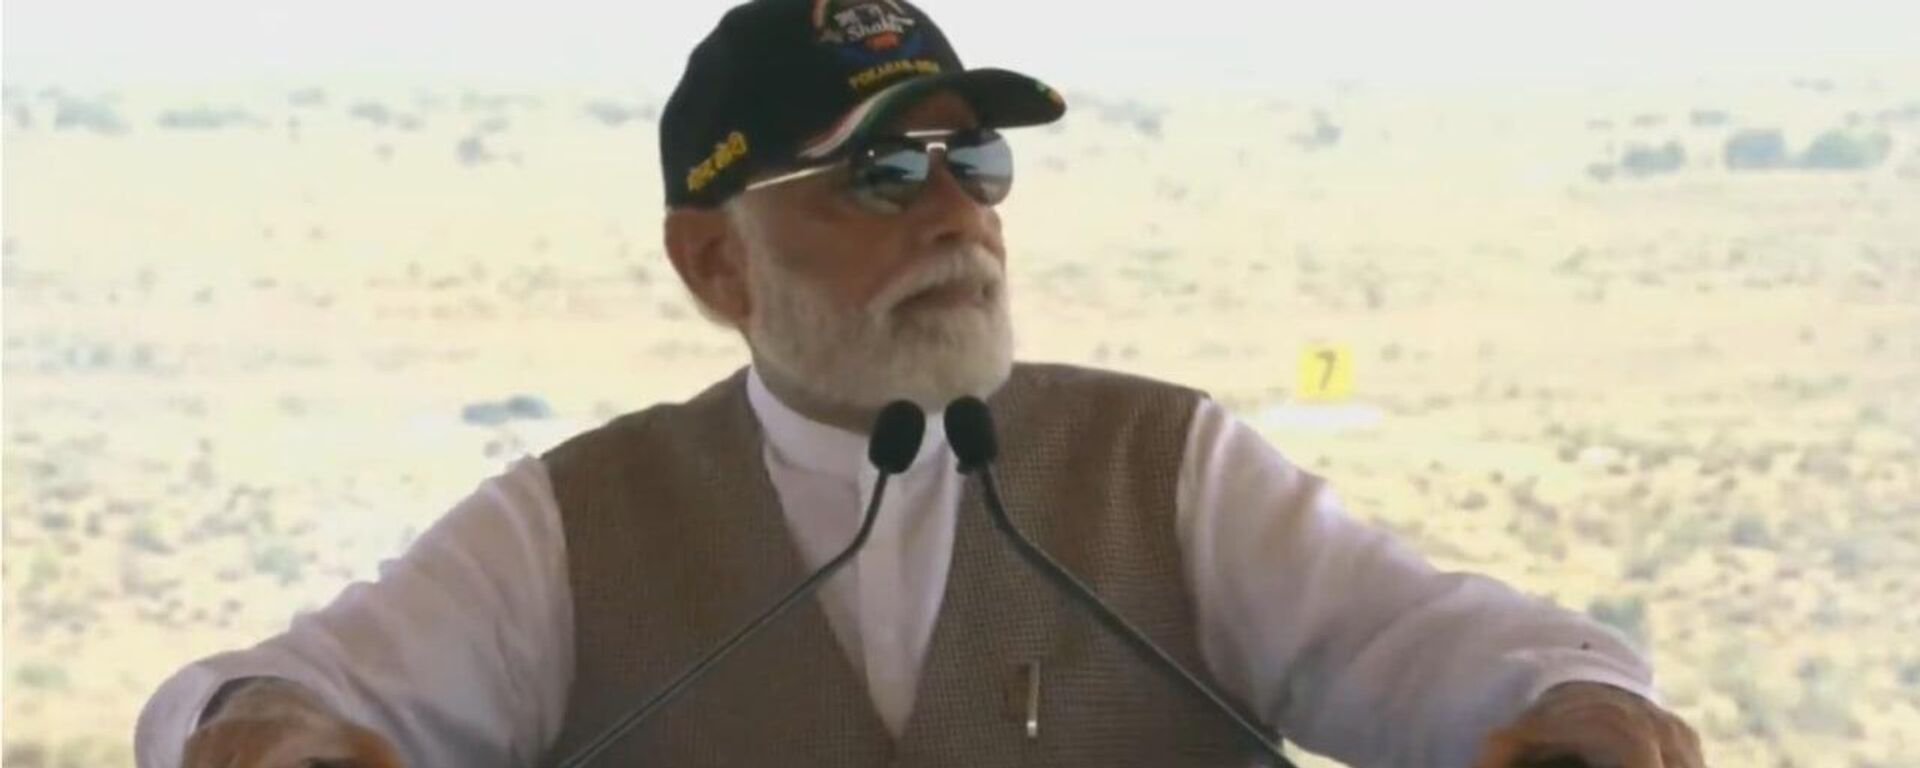 Modi Reiterates Self-Reliance Focus as Indian PM Witnesses Tri-Service Exercise in Rajasthan - Sputnik India, 1920, 12.03.2024